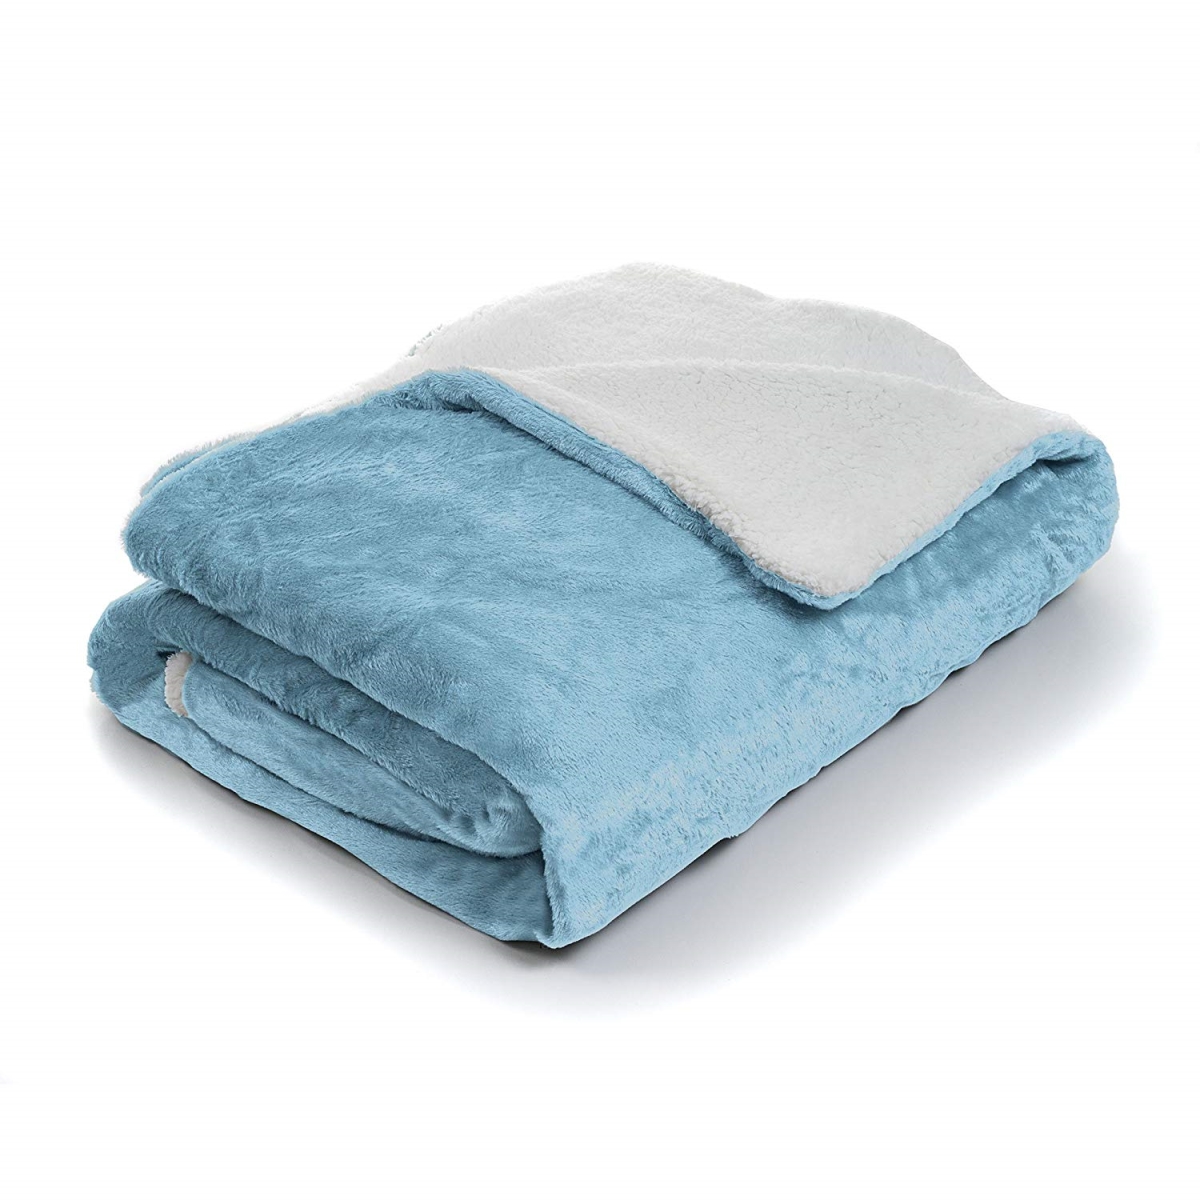 61a-06493 Fleece Blanket With Sherpa Backing, Full & Queen Size - Blue